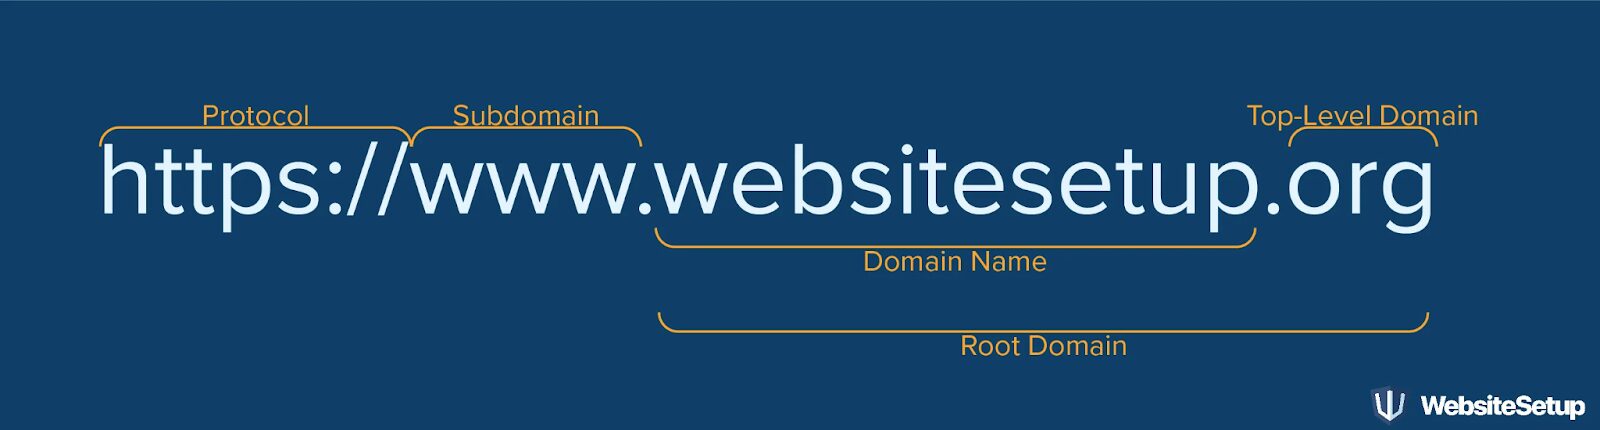 domain name structure to build a wordpress website